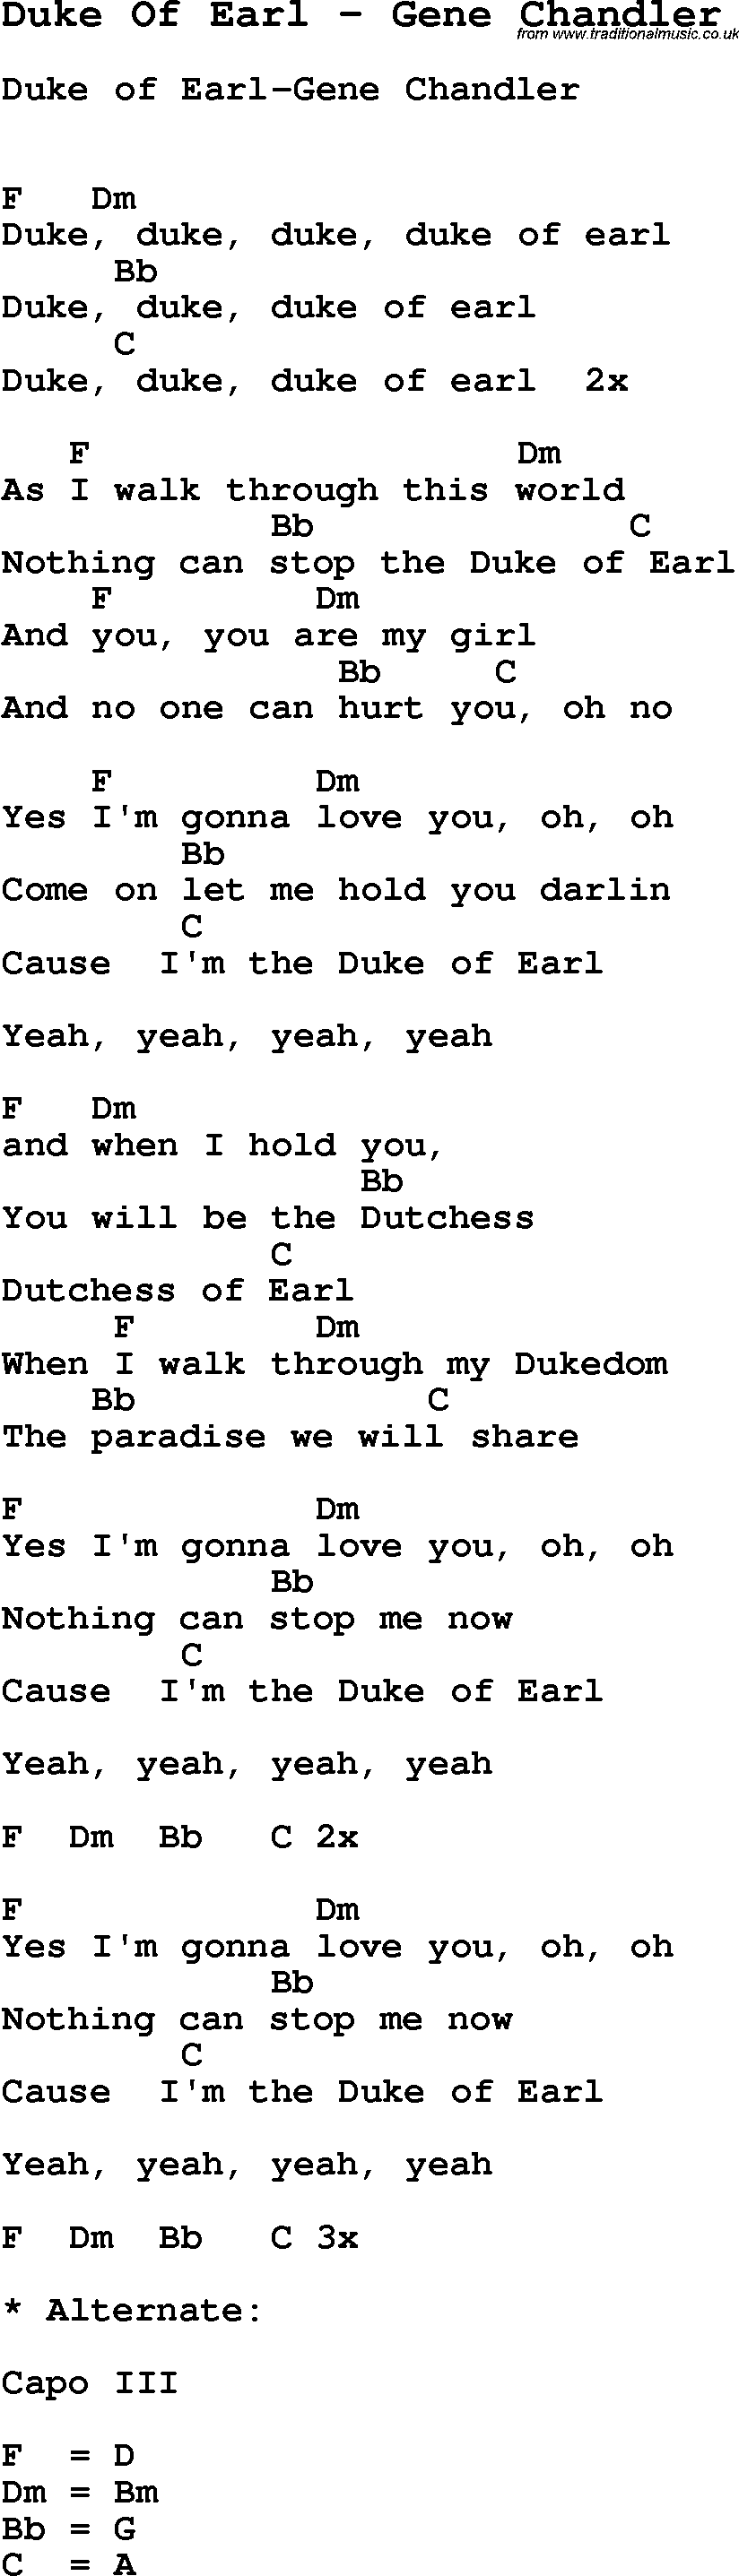 Song Duke Of Earl by Gene Chandler, with lyrics for vocal performance and accompaniment chords for Ukulele, Guitar Banjo etc.